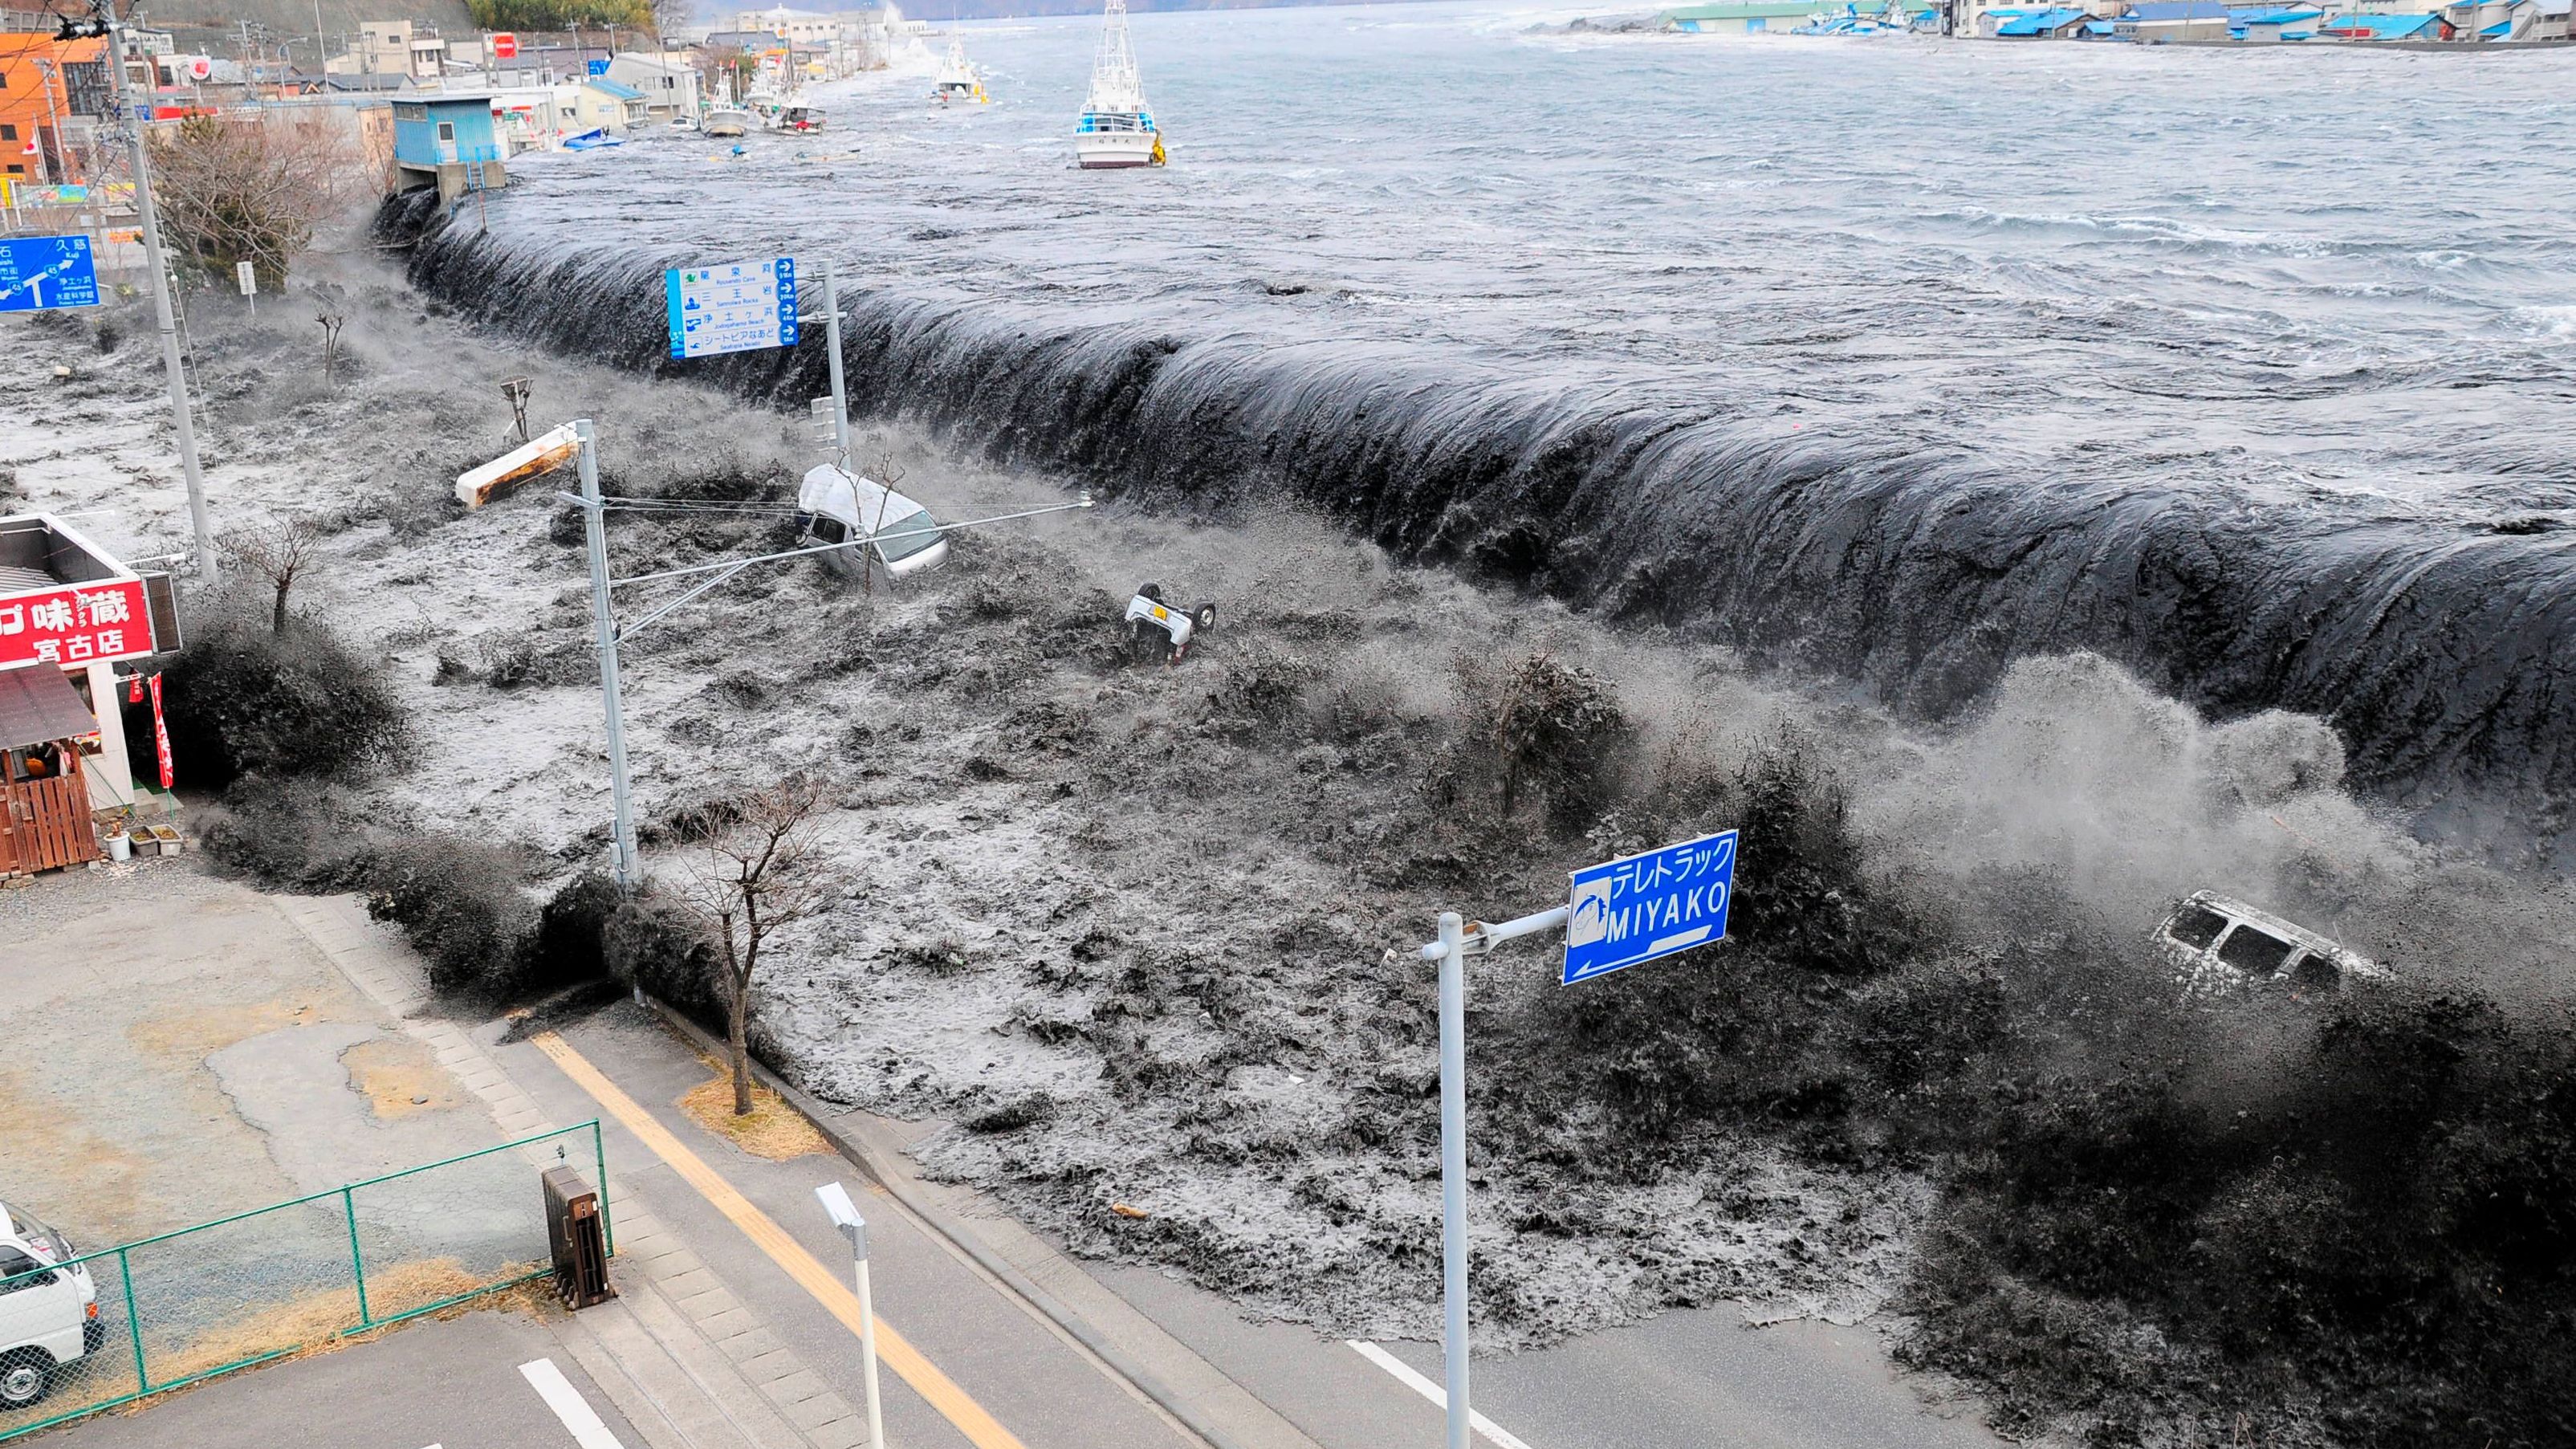 A wave approaches Miyako, Japan, after a 9.1 magnitude earthquake occurred in March 2011. <a href="https://www.cnn.com/2013/07/17/world/asia/japan-earthquake---tsunami-fast-facts/index.html" target="_blank">The earthquake</a> caused a tsunami with 30-foot waves that damaged several nuclear reactors in the area. It is the largest earthquake ever to hit Japan.